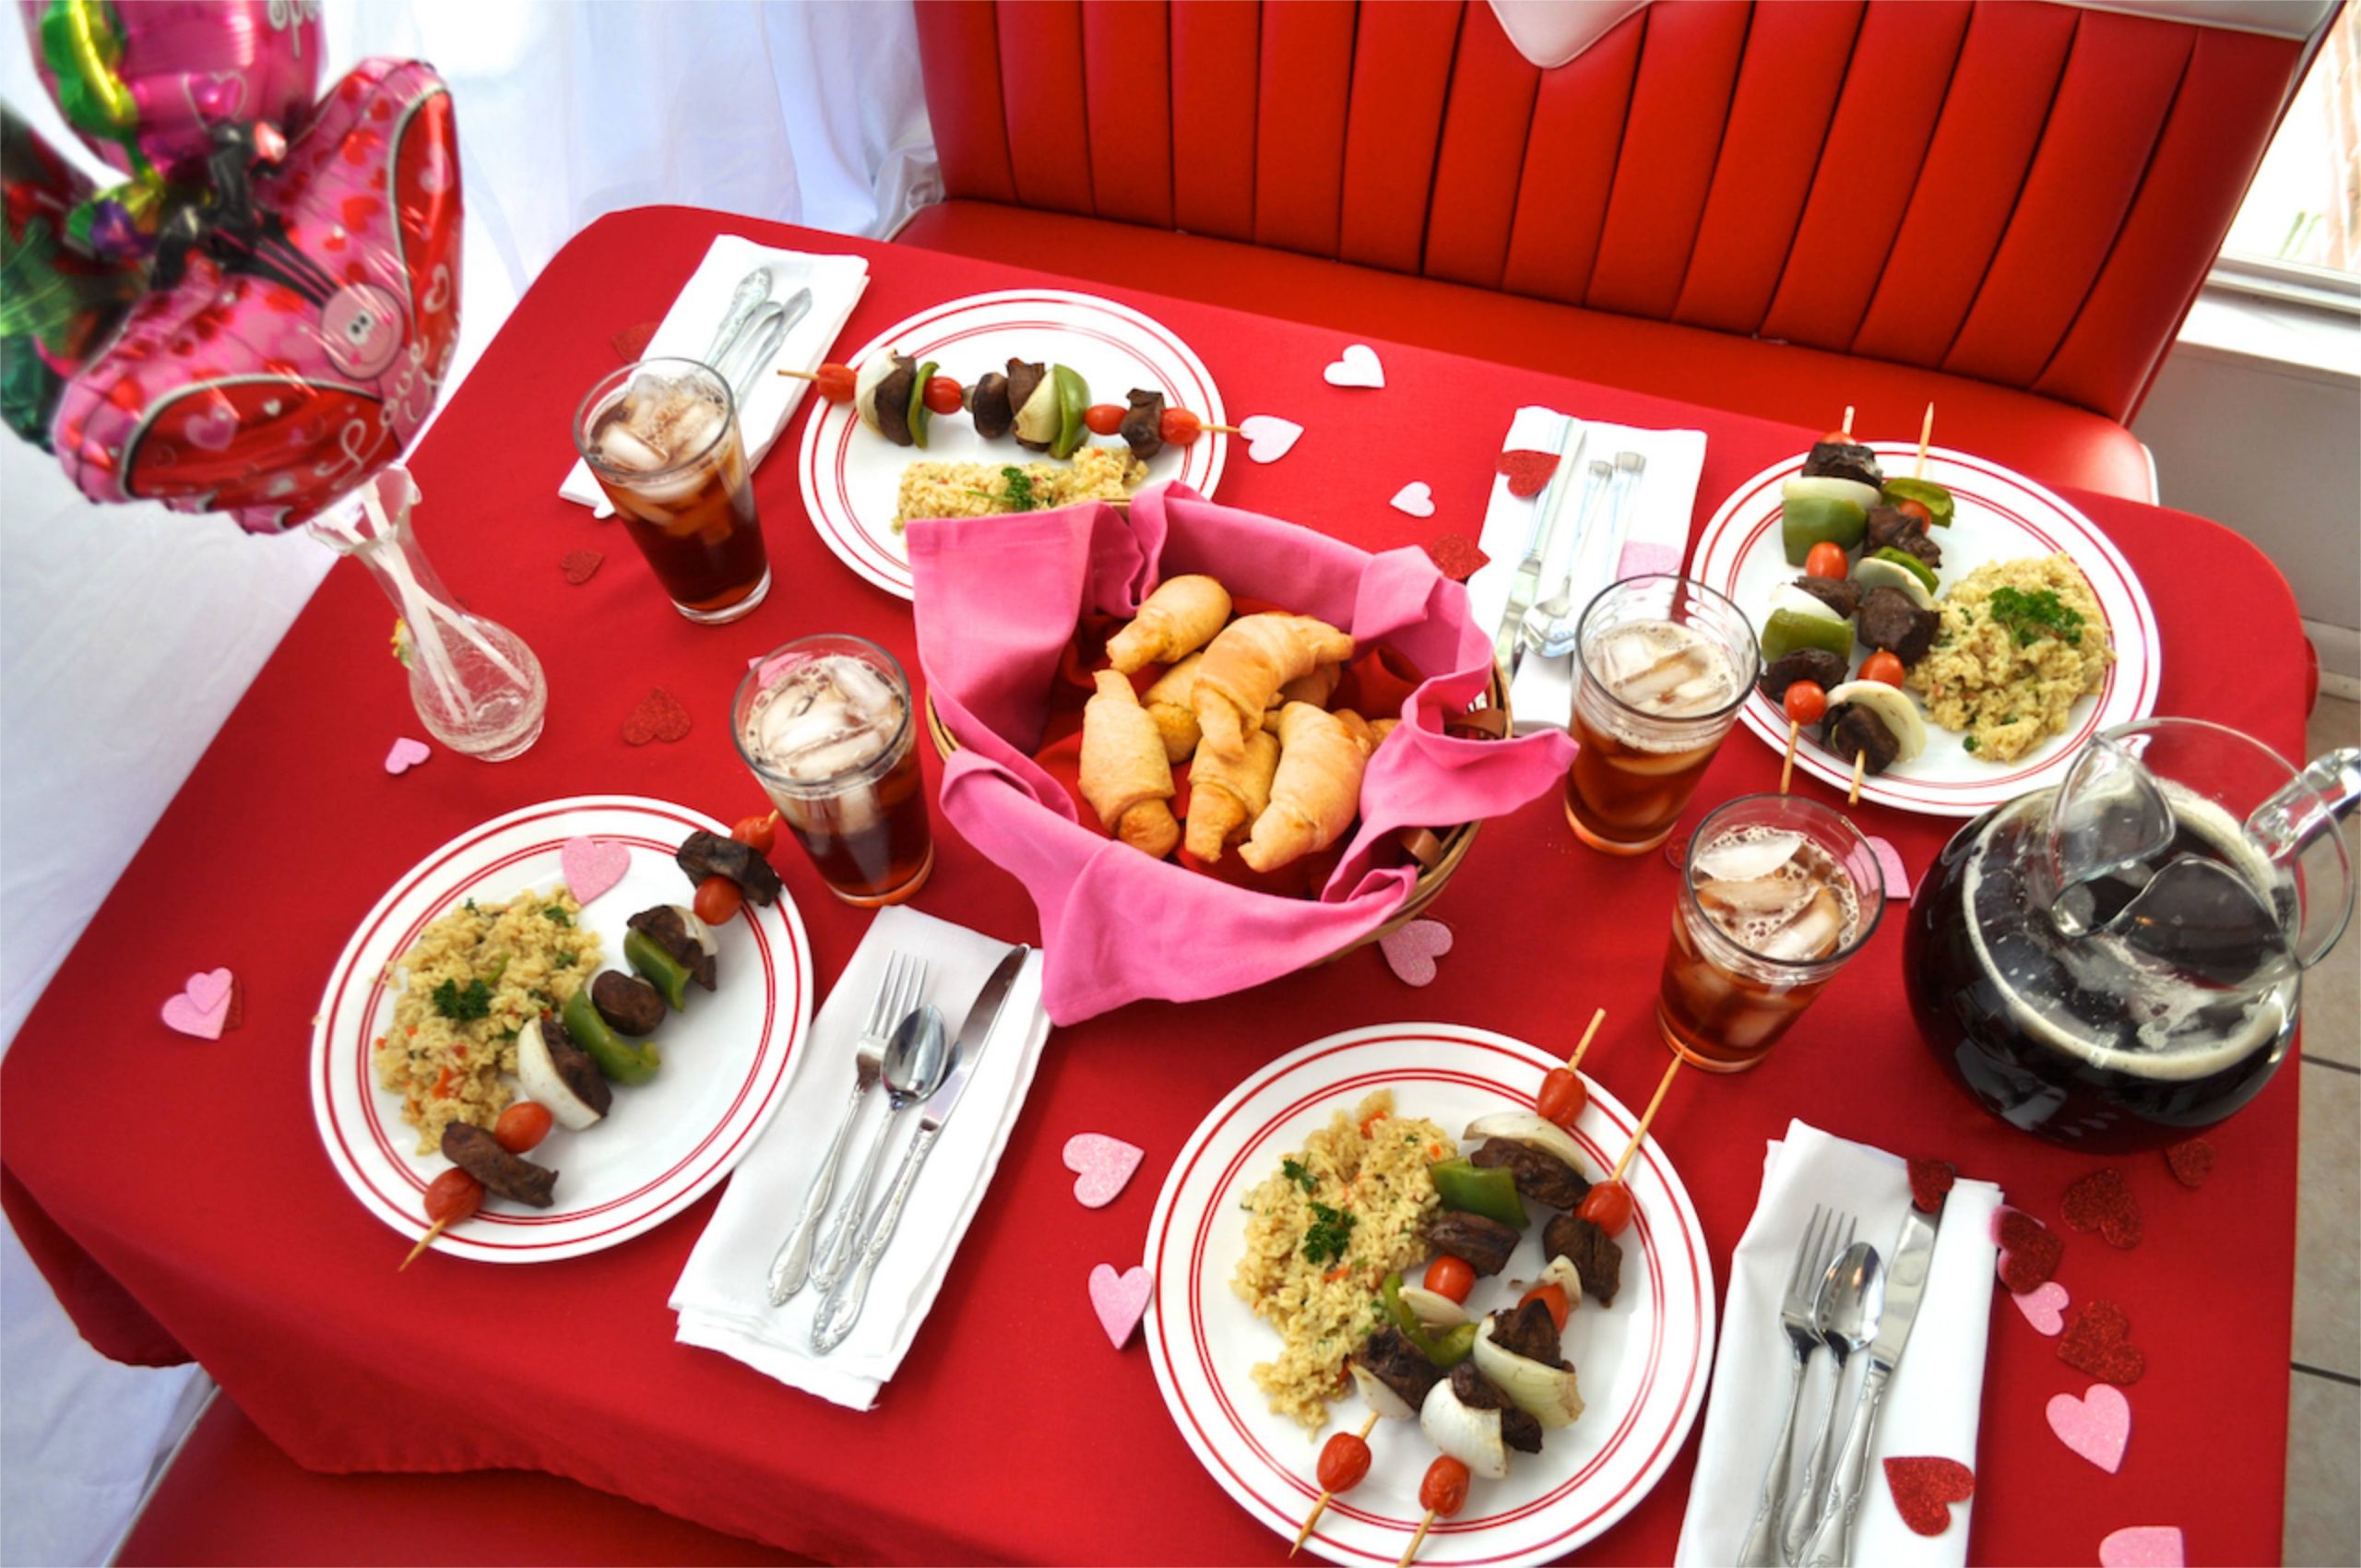 Valentines Dinner Special Best Of Valentines Dinner Ideas with 5 Lovingly Dishes